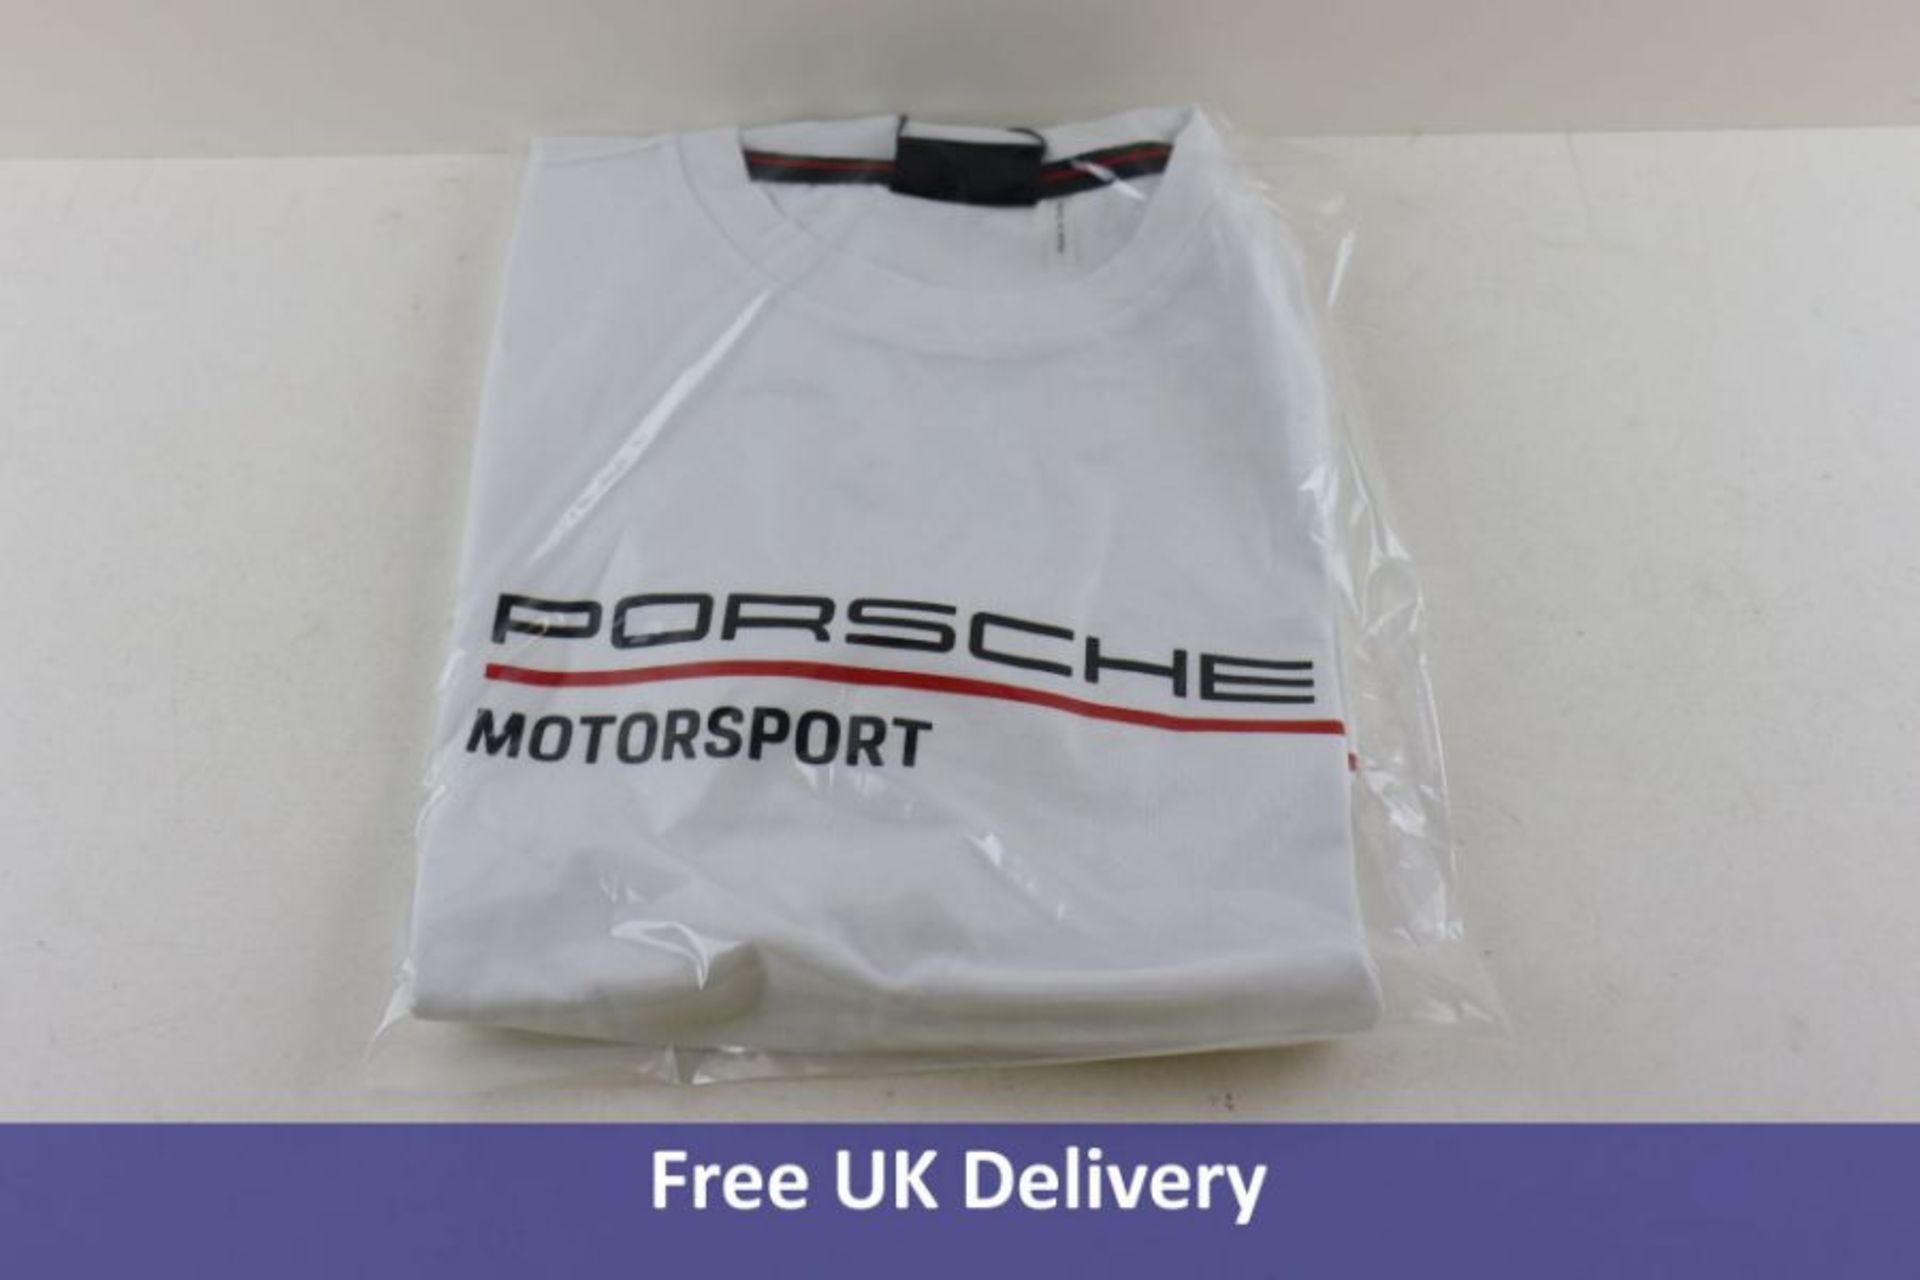 Two Porsche Men's Motorsport Fanwear T-Shirts, White to Include 1x Size M and 1x Size S